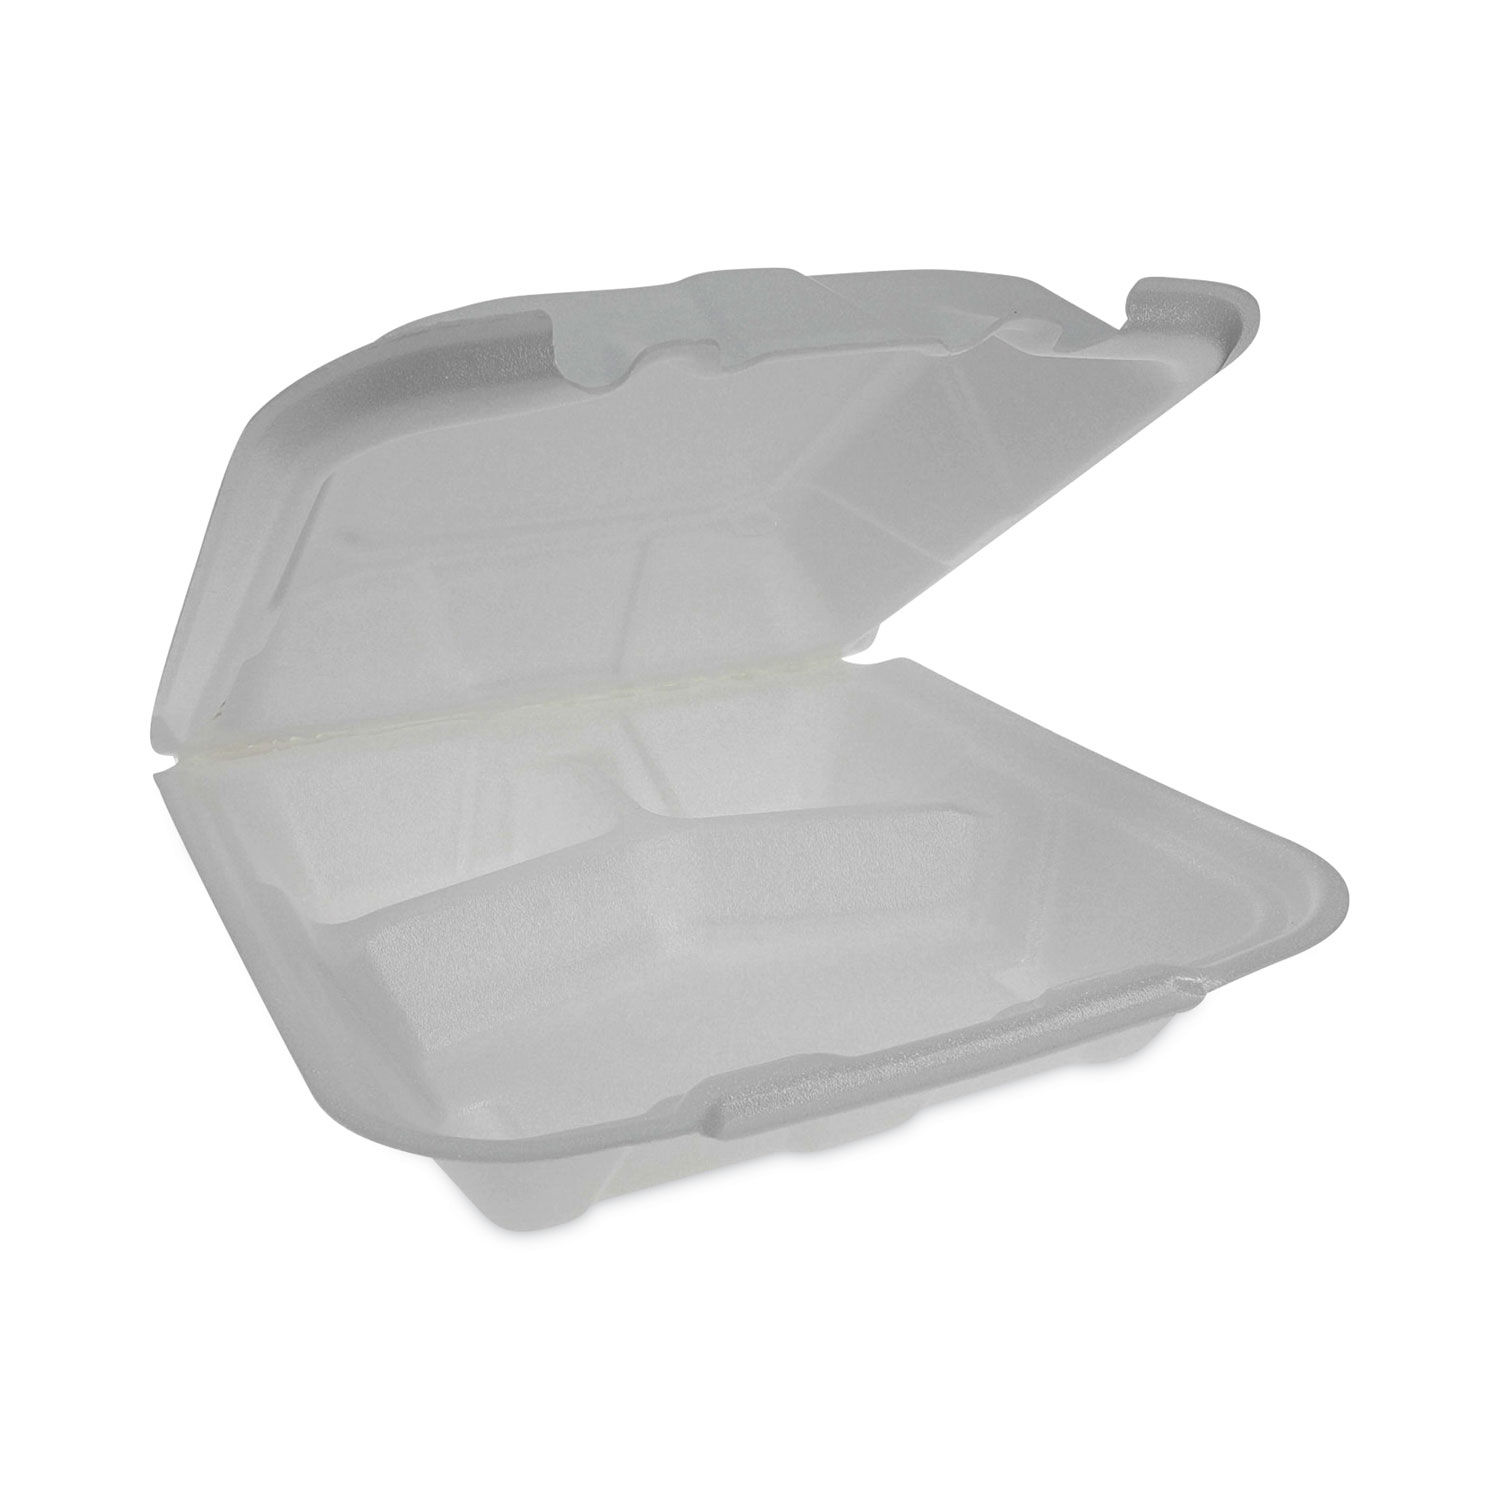 3-Compartment Foam Containers with Hinged Lids, 10-ct. Packs